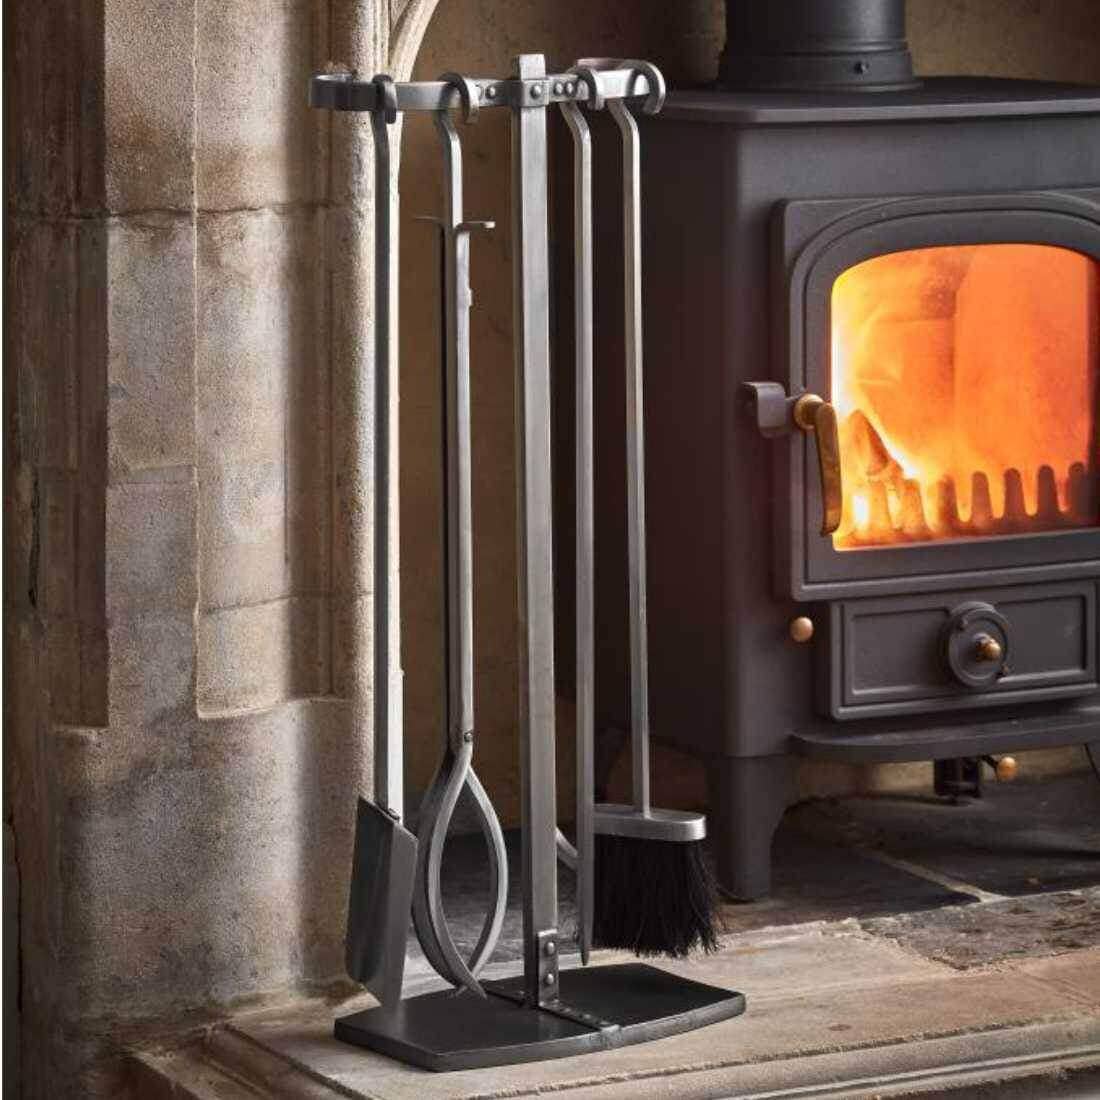 Must-Have Fireside Accessories to Warm Up Your Home - The Farthing